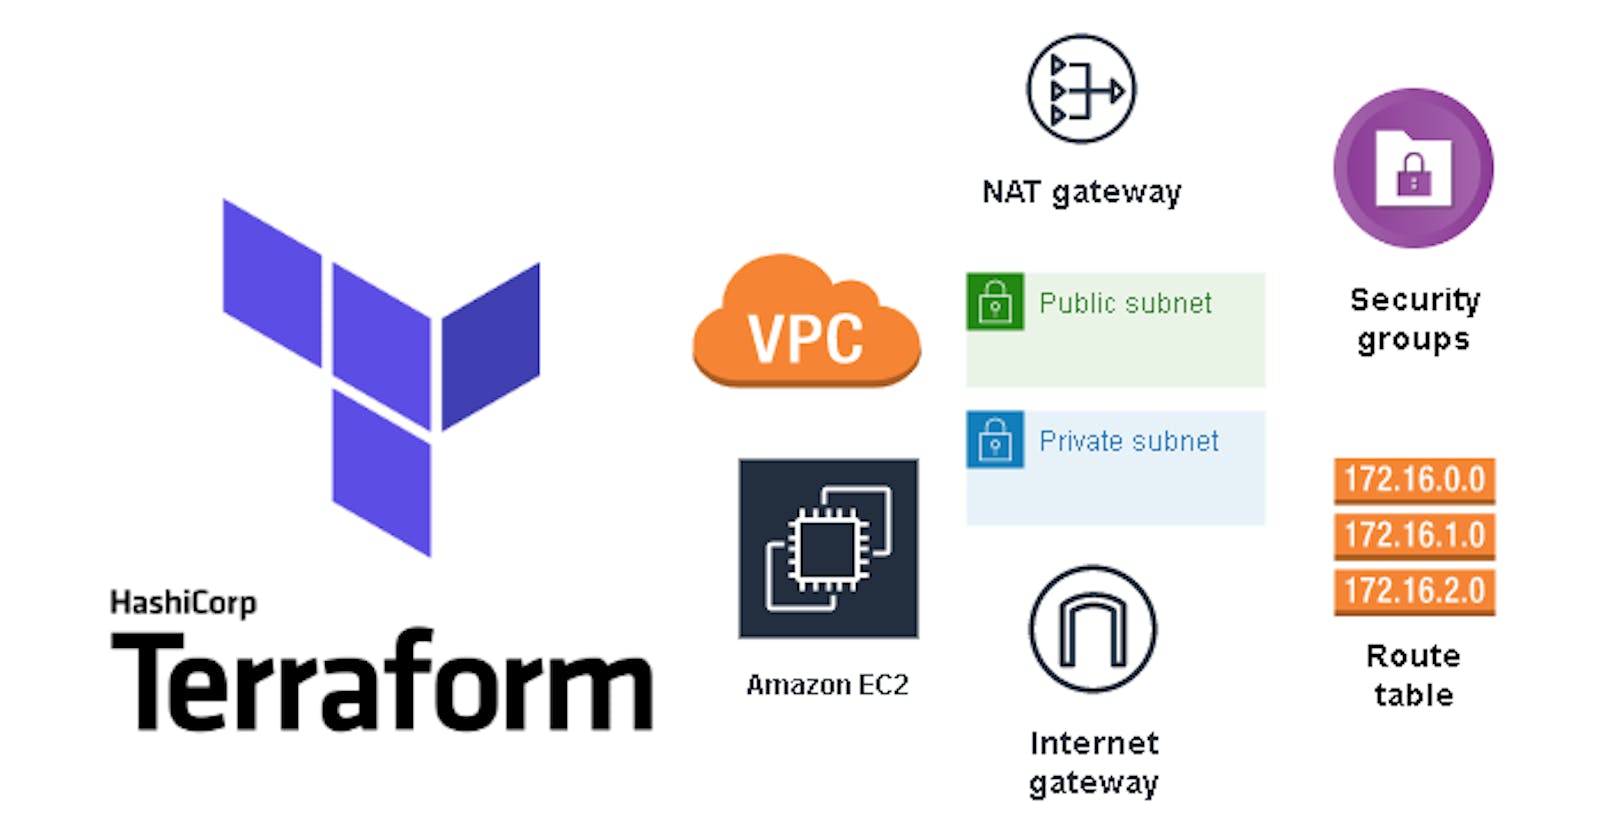 Terraform: Create VPC, Subnets, and EC2 instances in multiple availability zones